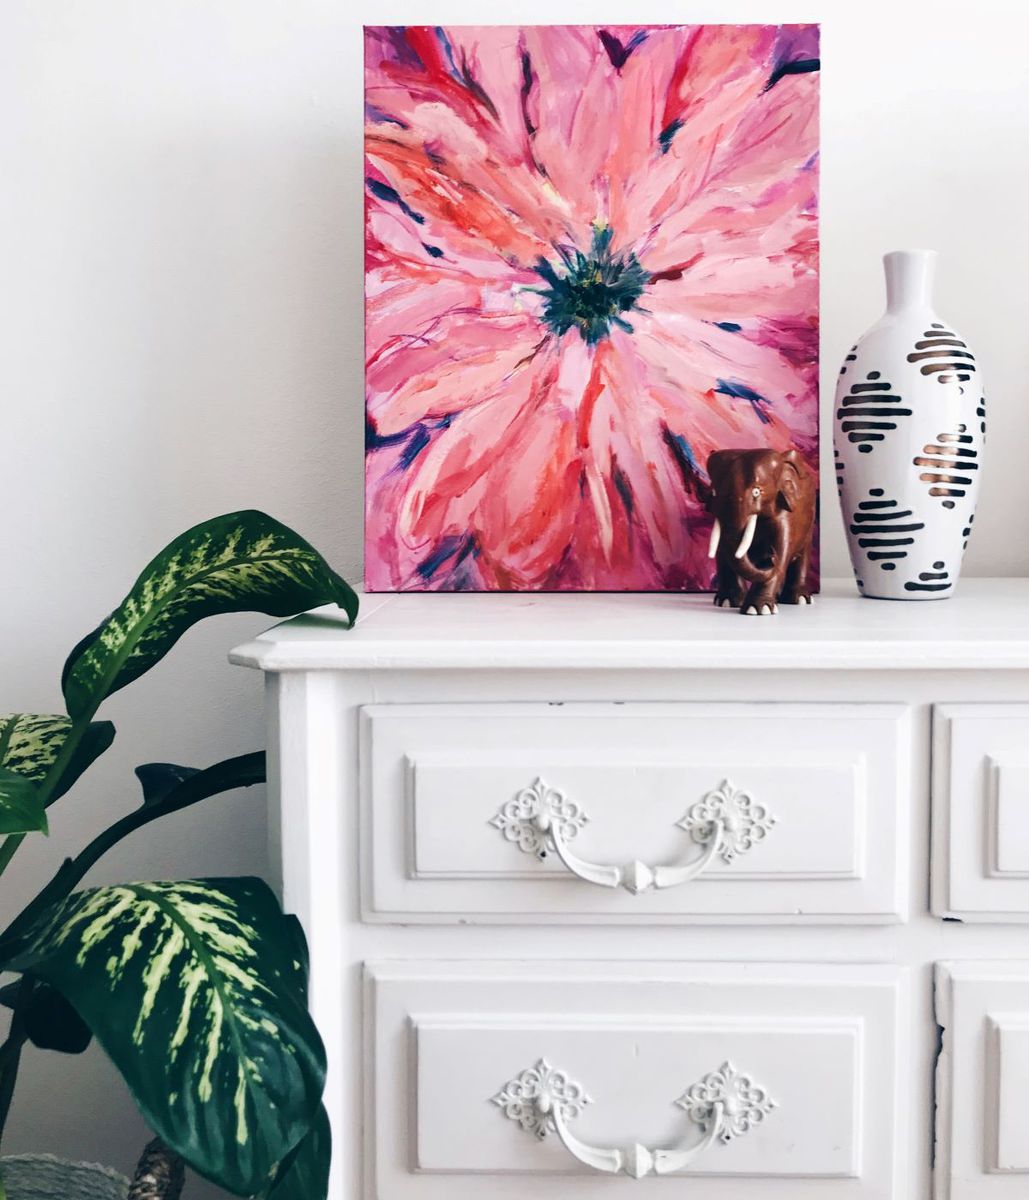 6 Exquisite Thrifted Decor Ideas For Your Home